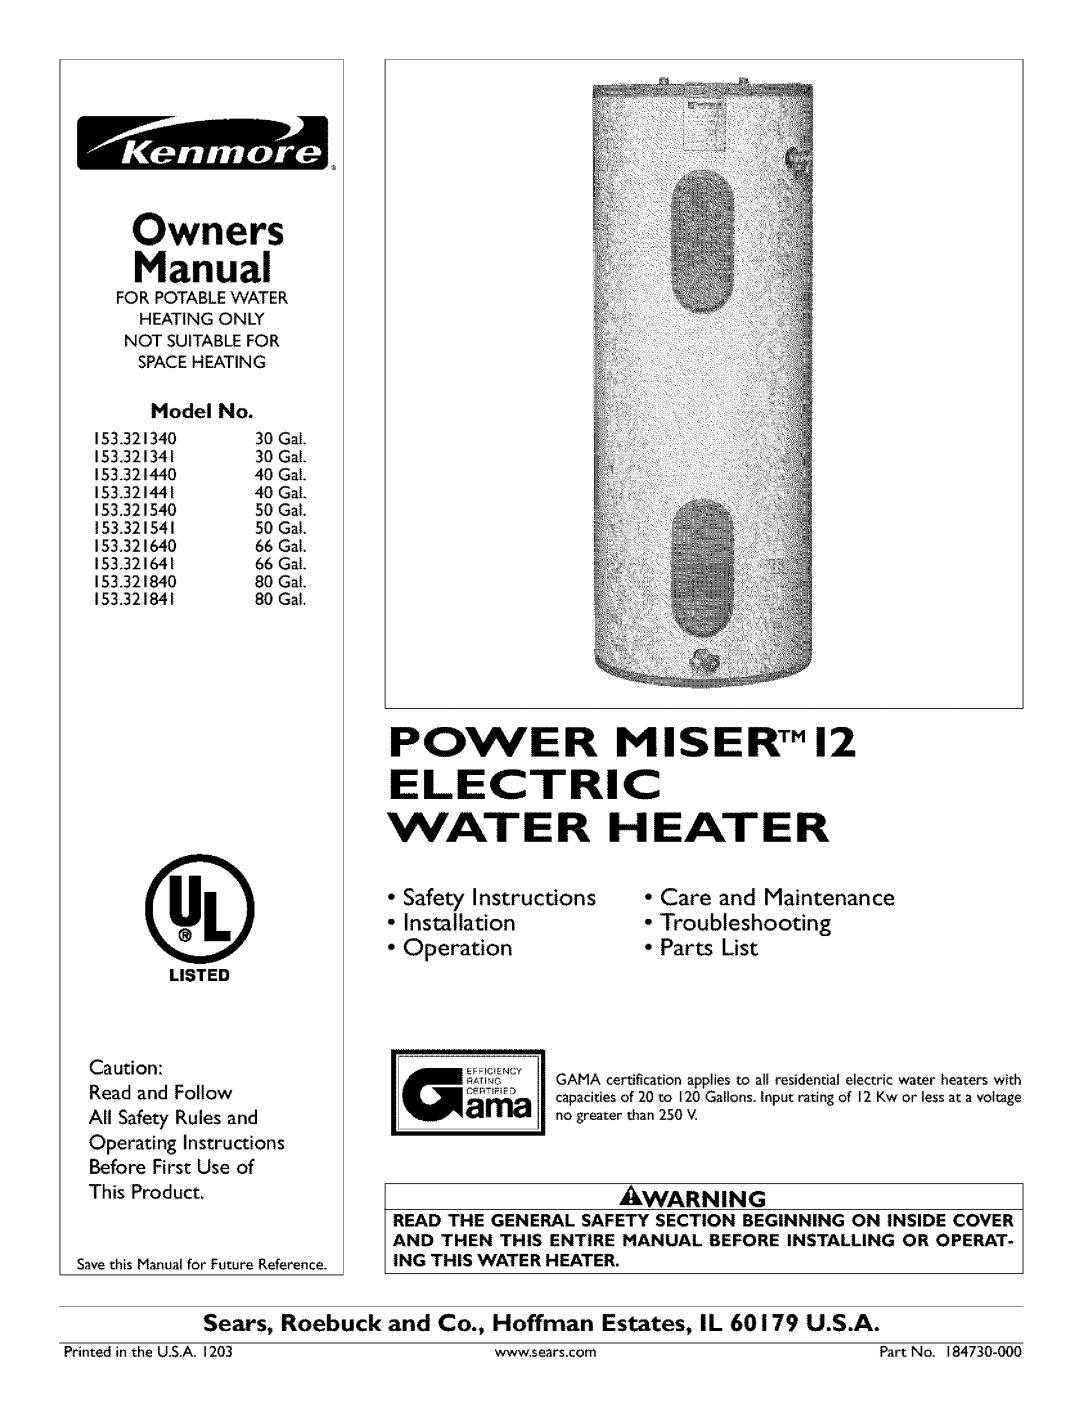 Kenmore 153.321541, 153.321441, 153.321841, 153.32134 owner manual Installation, POWER MISER TM12 ELECTRIC WATER HEATER 